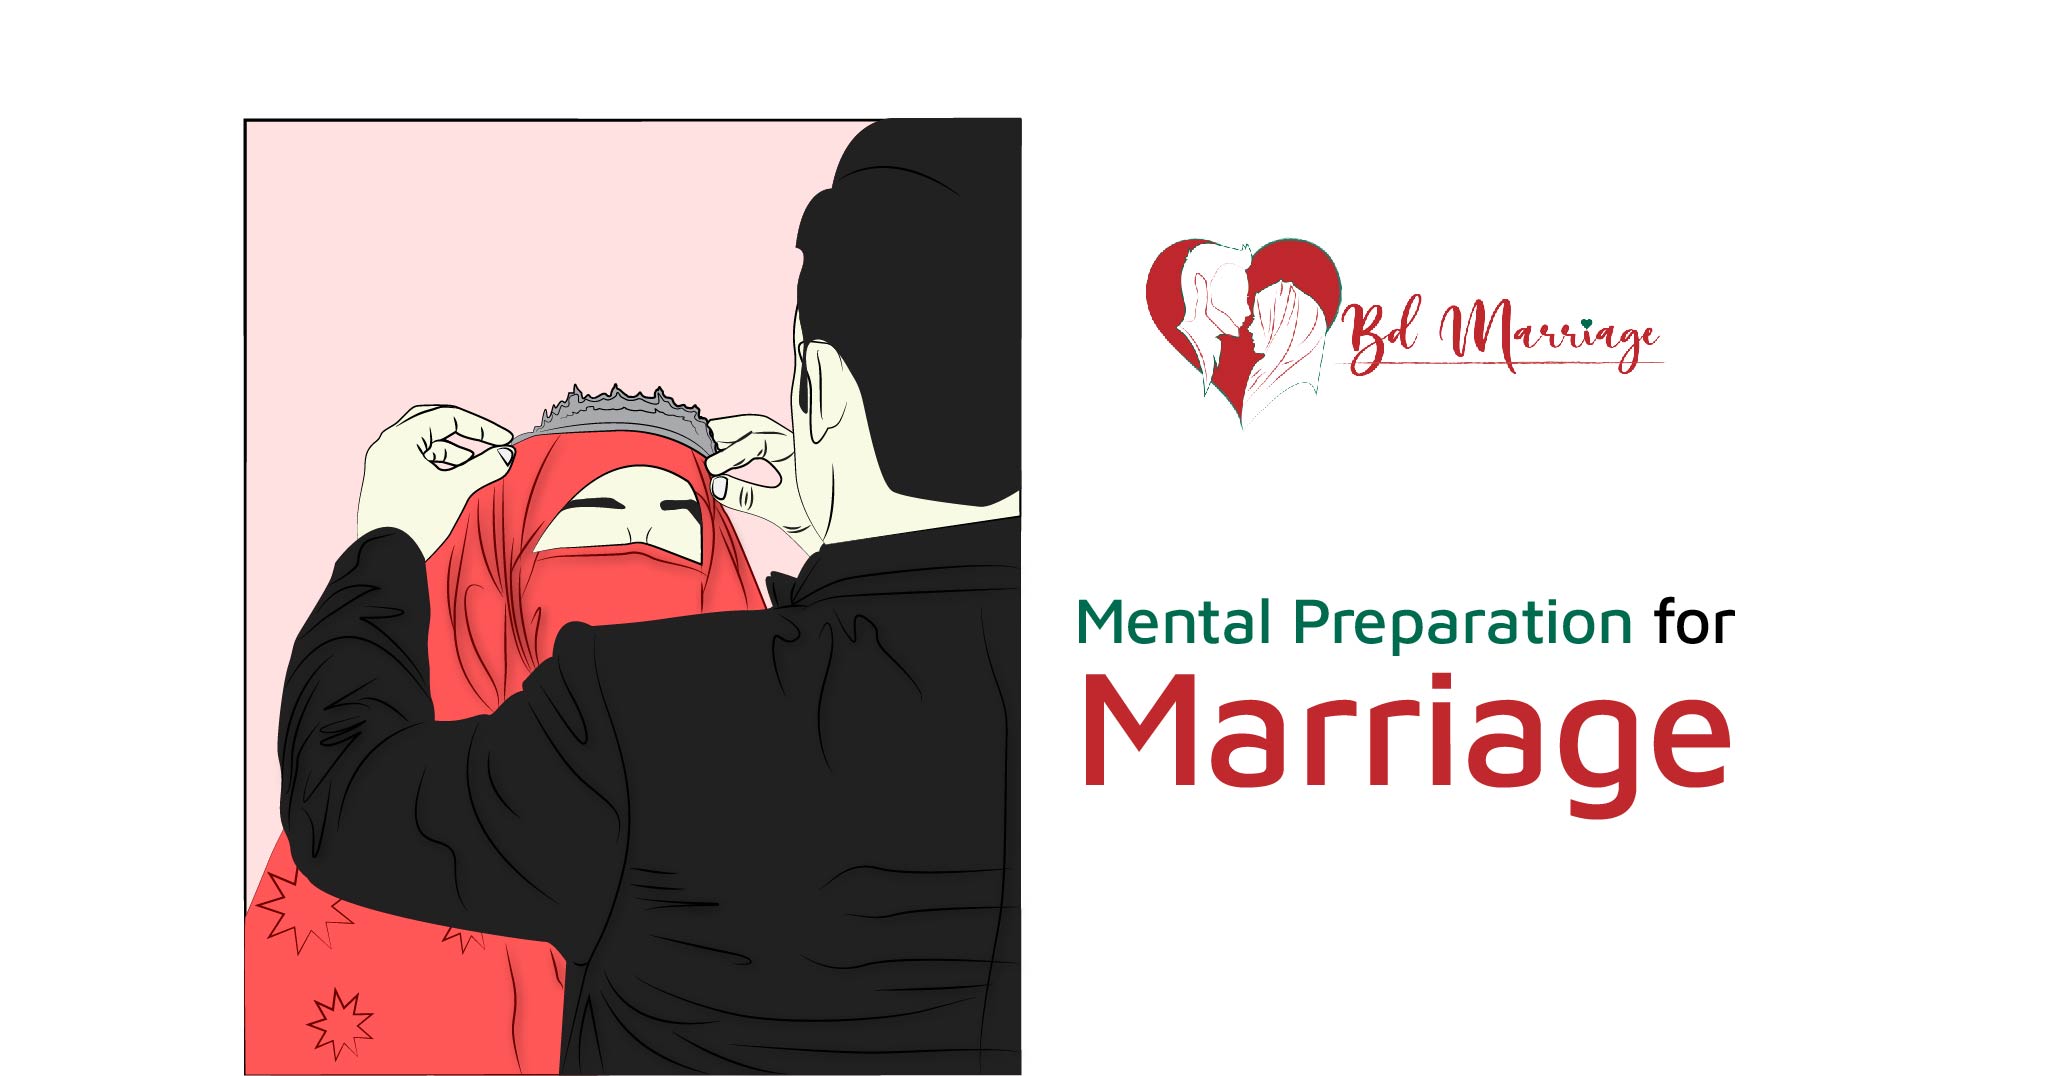 Mental Preparation for Marriage